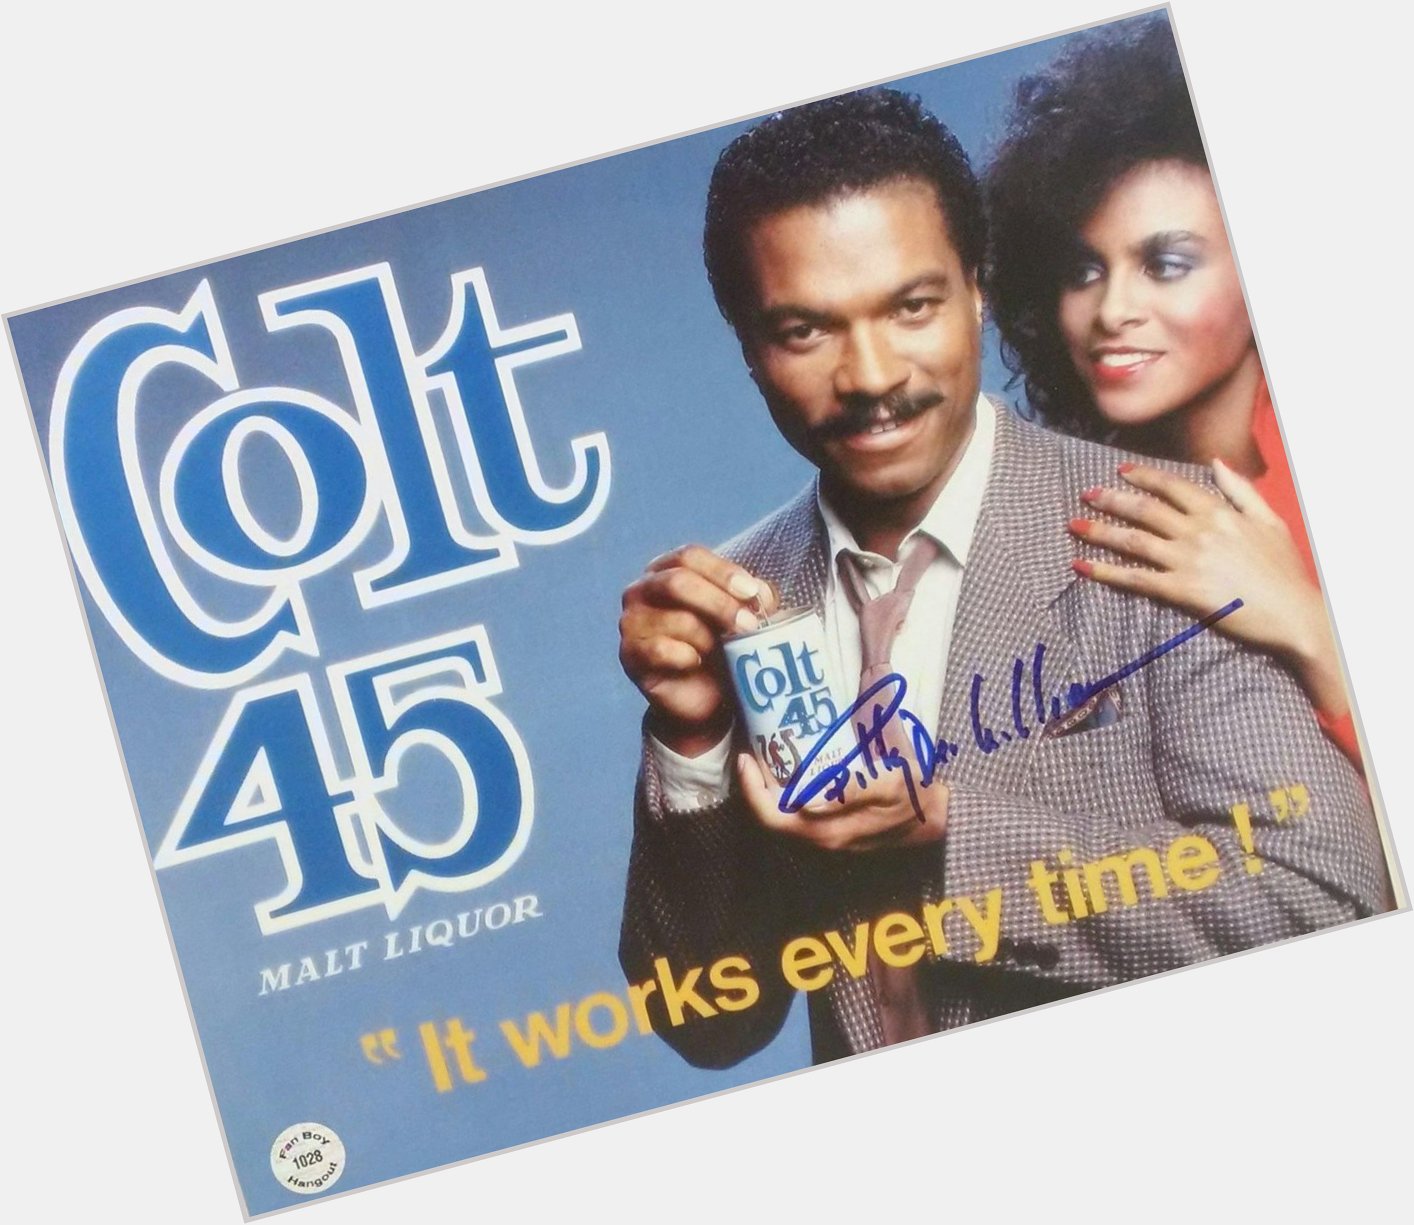 Happy Birthday to the coolest guy in the galaxy, Billy Dee Williams

Also, that tag line creepy af lol. 